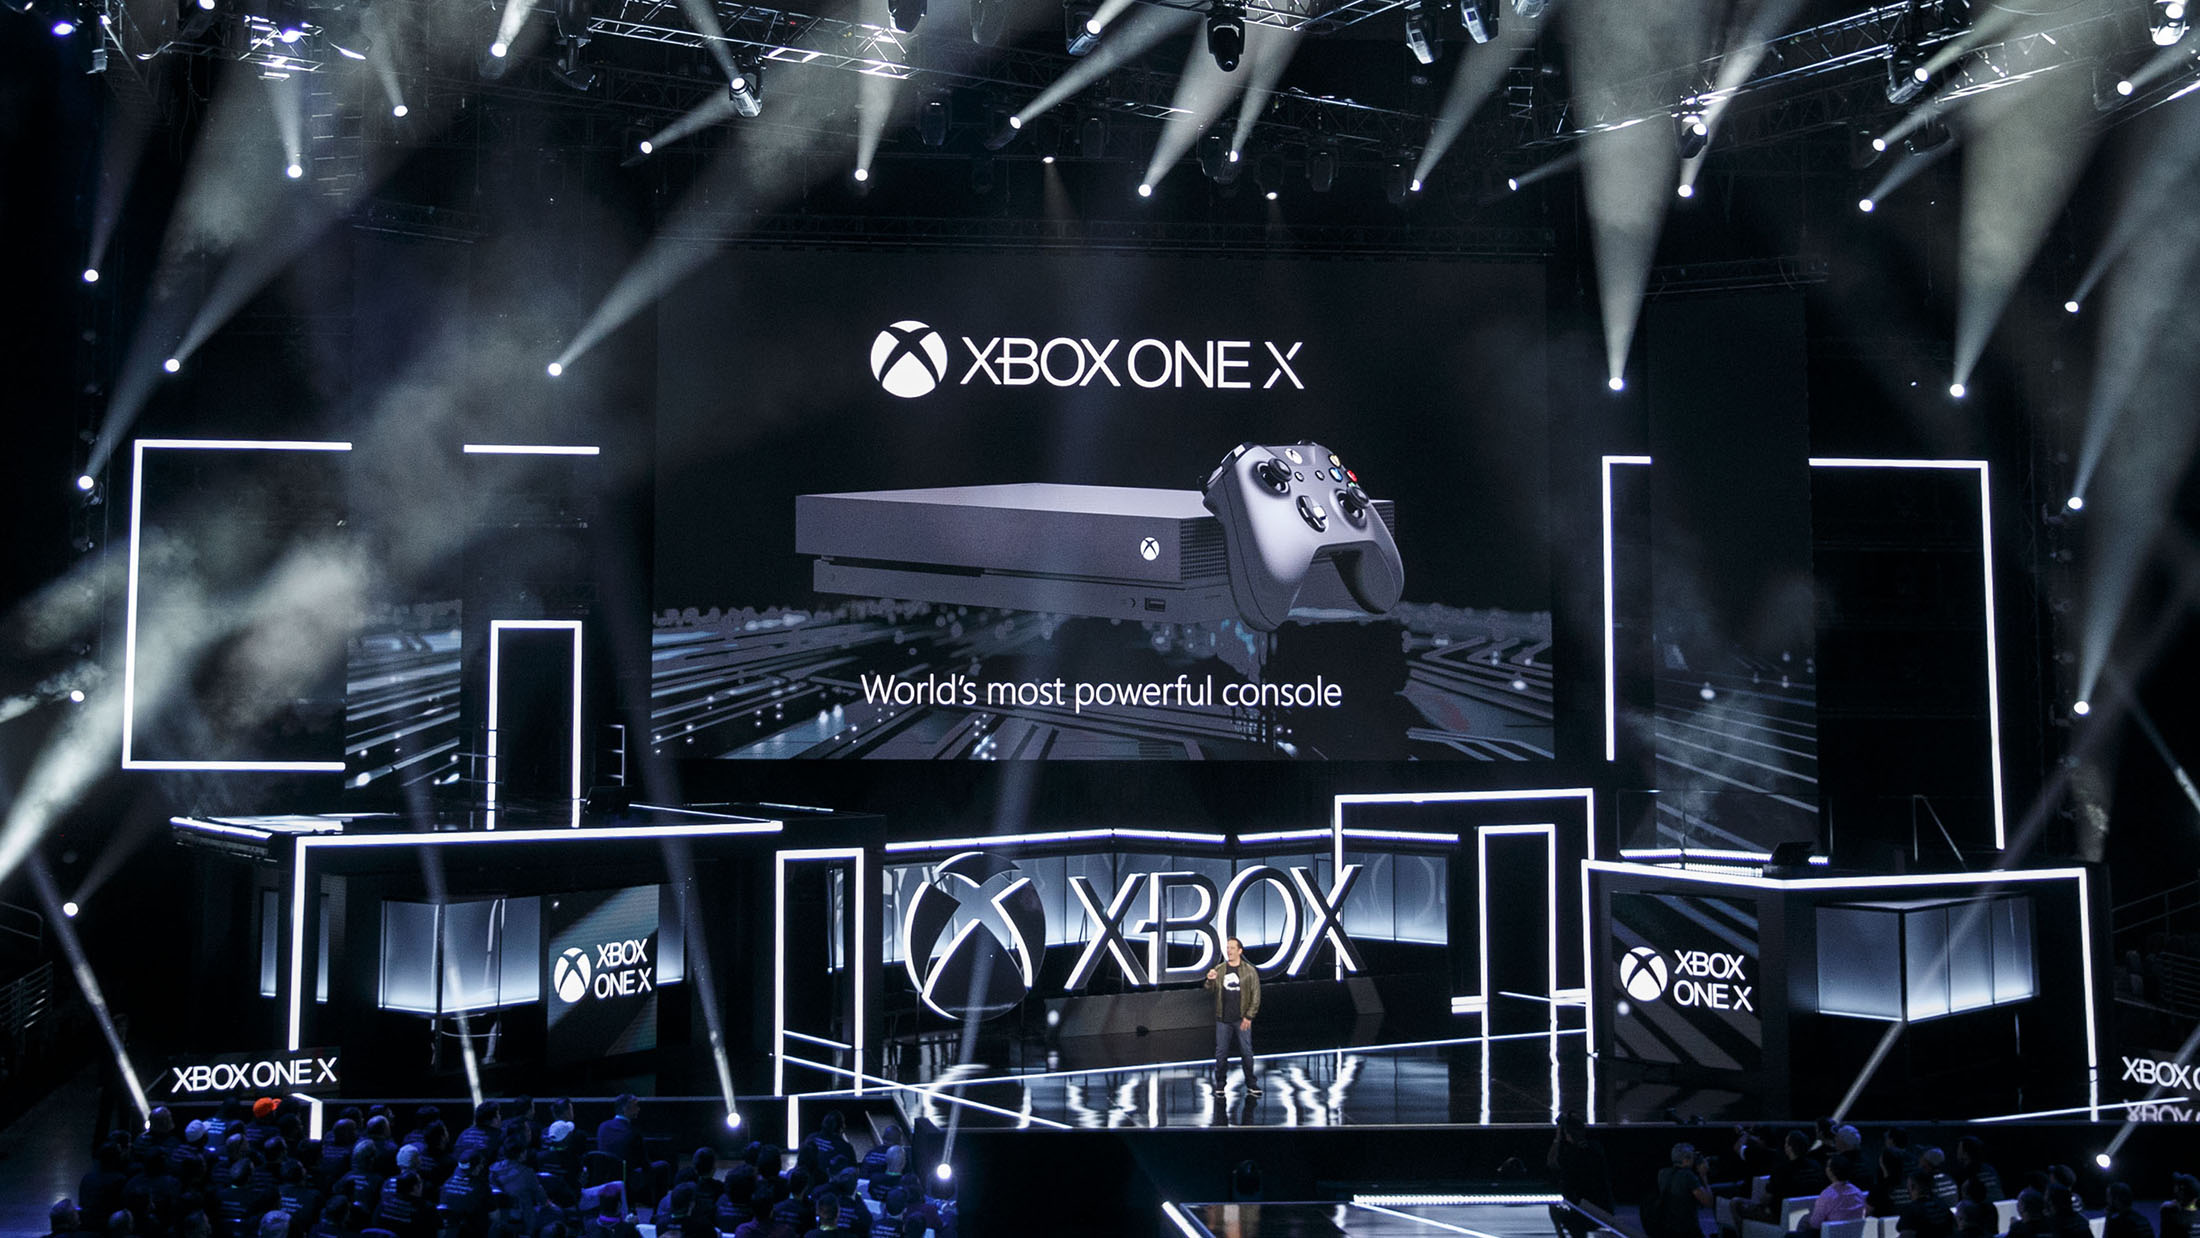 The new Xbox One X unveiling on June 11.
